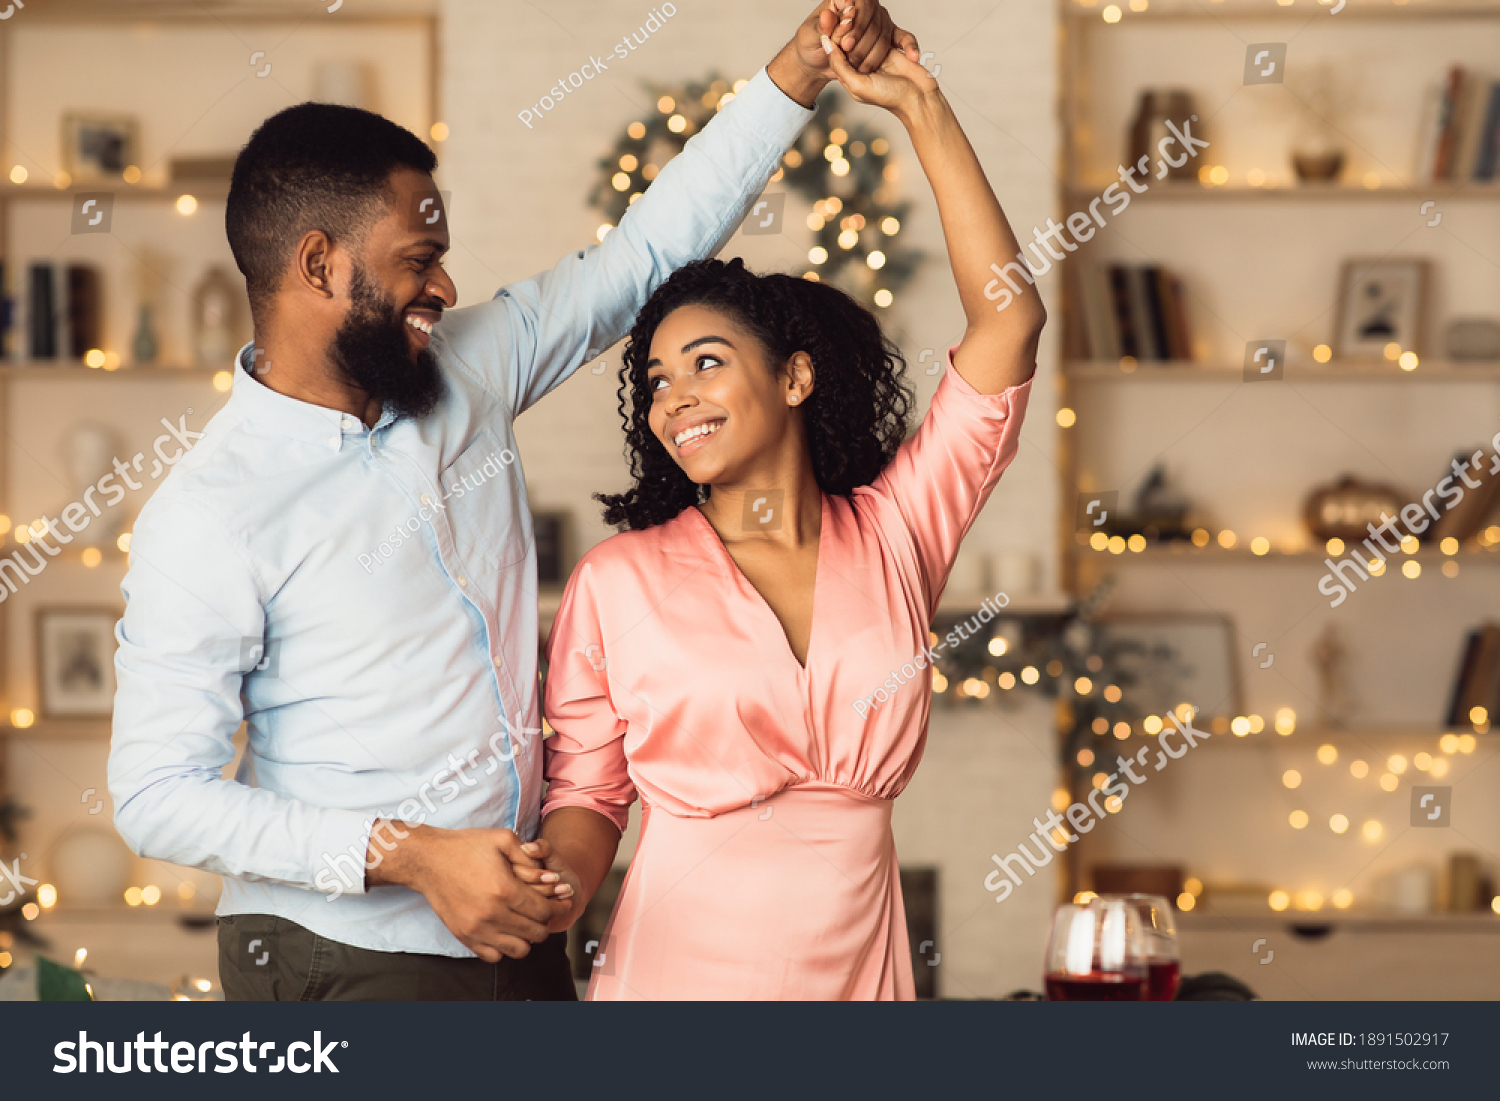 Happy Loving Family. Portrait of beautiful young african american couple in love dancing and looking at each other. Smiling black bearded man having fun with his pretty excited woman #1891502917